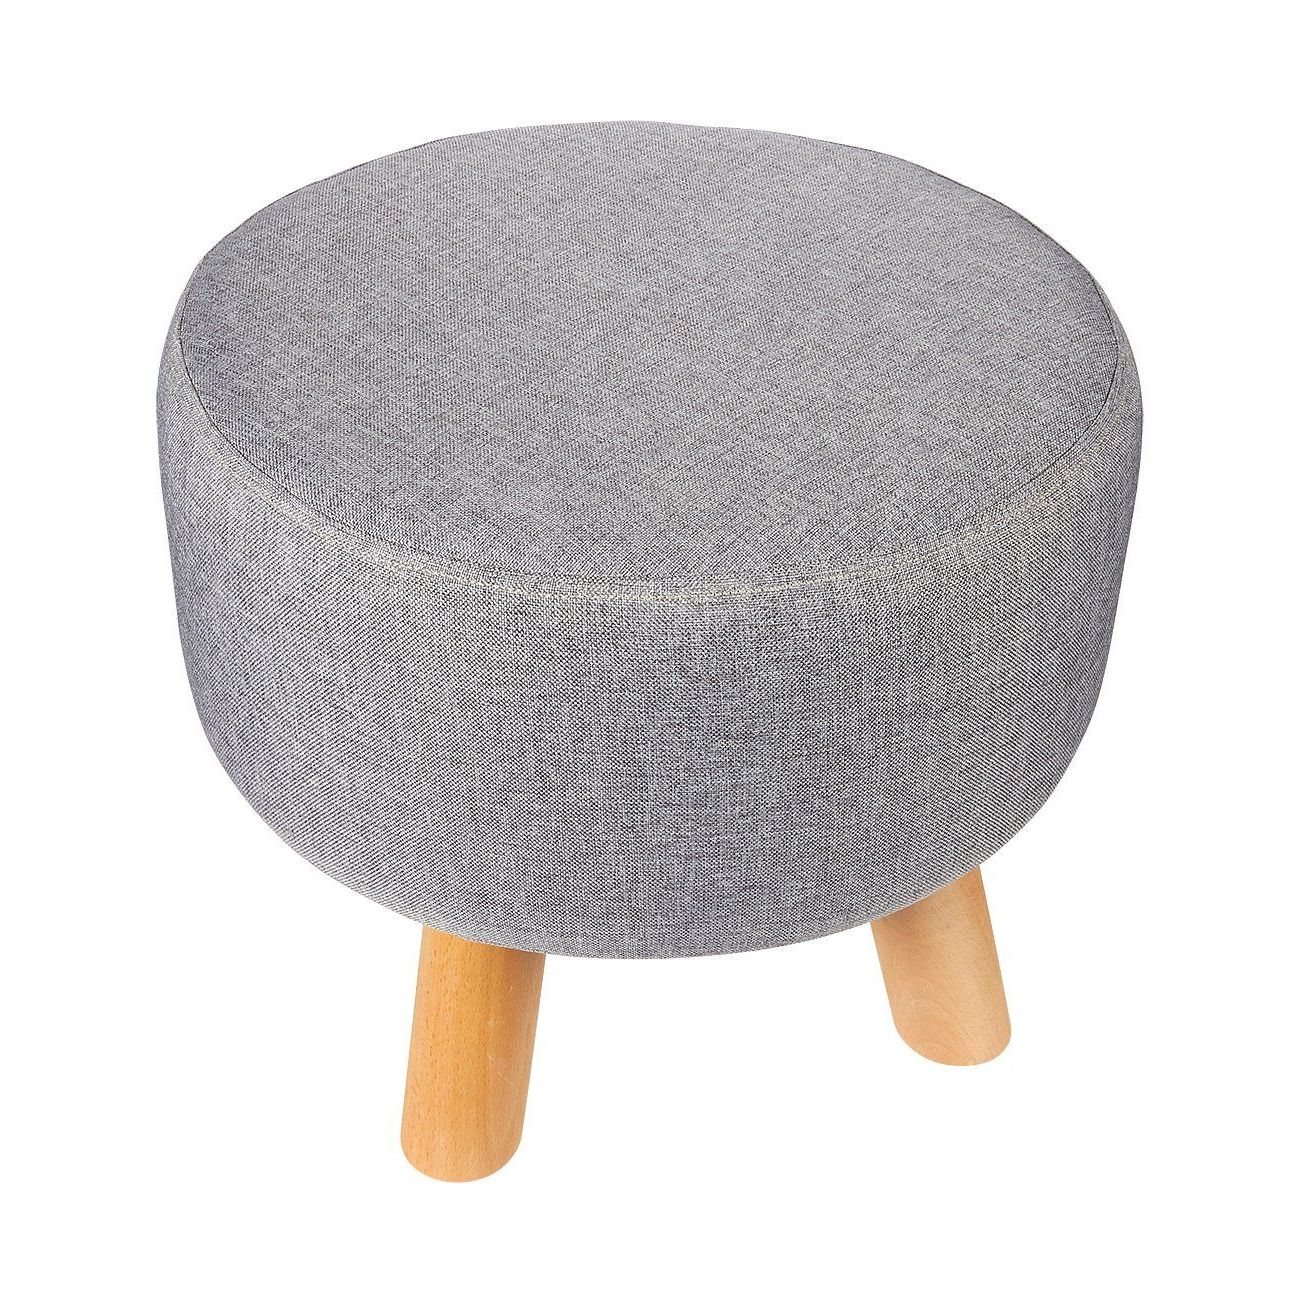 Cream Linen And Fir Wood Round Ottomans Throughout Well Liked Ottoman Footstool Round Pouf Ottoman Foot Stool Foot Rest With (View 2 of 10)